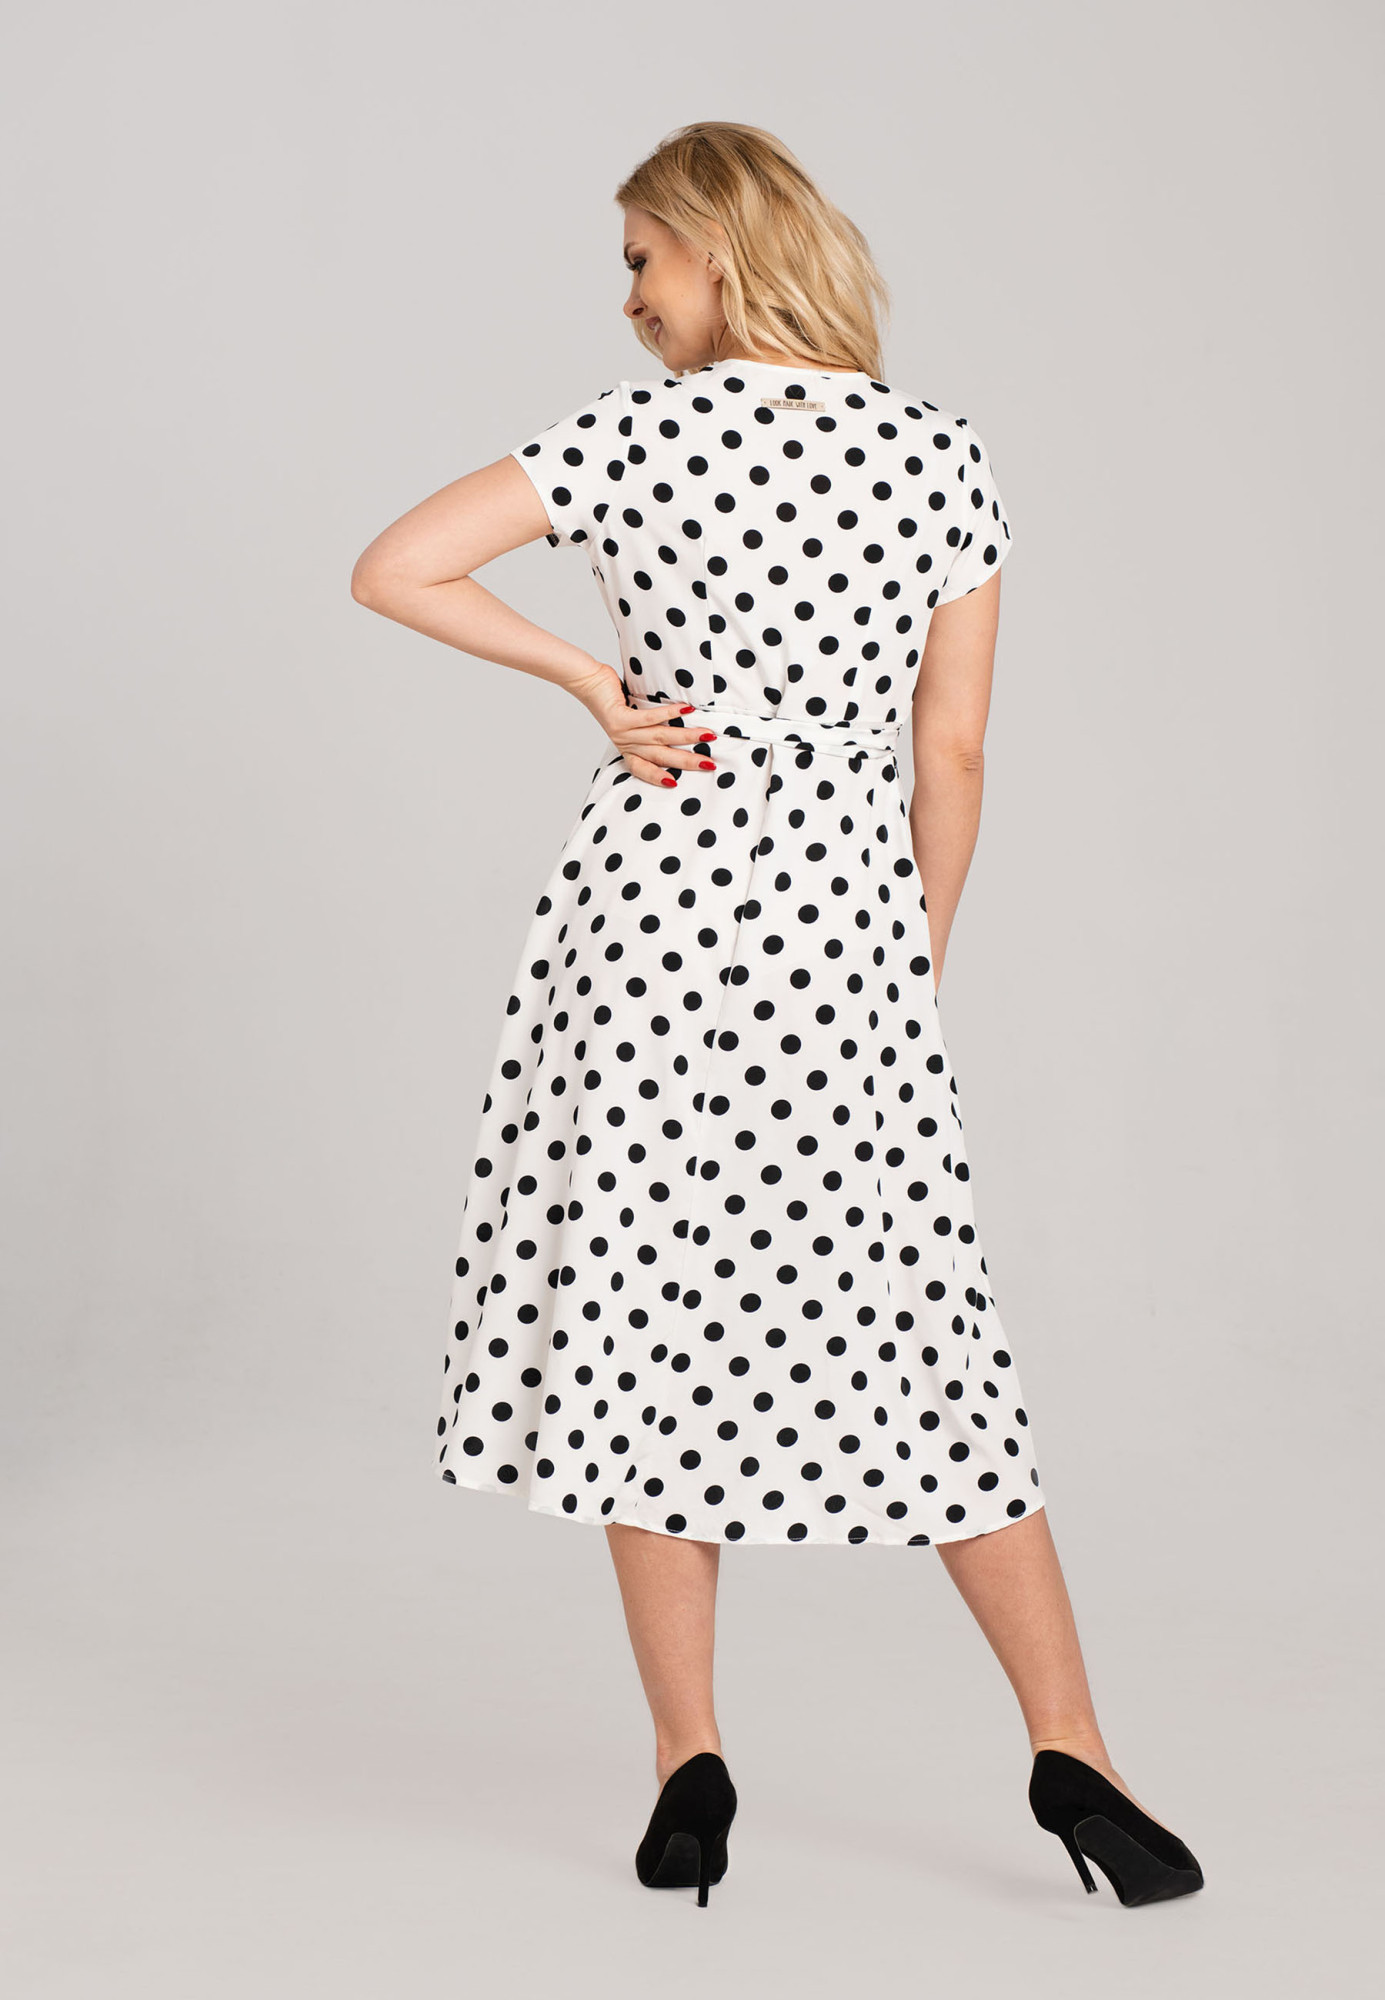 Look Made With Love Šaty N20 Polka Dots Black/White S